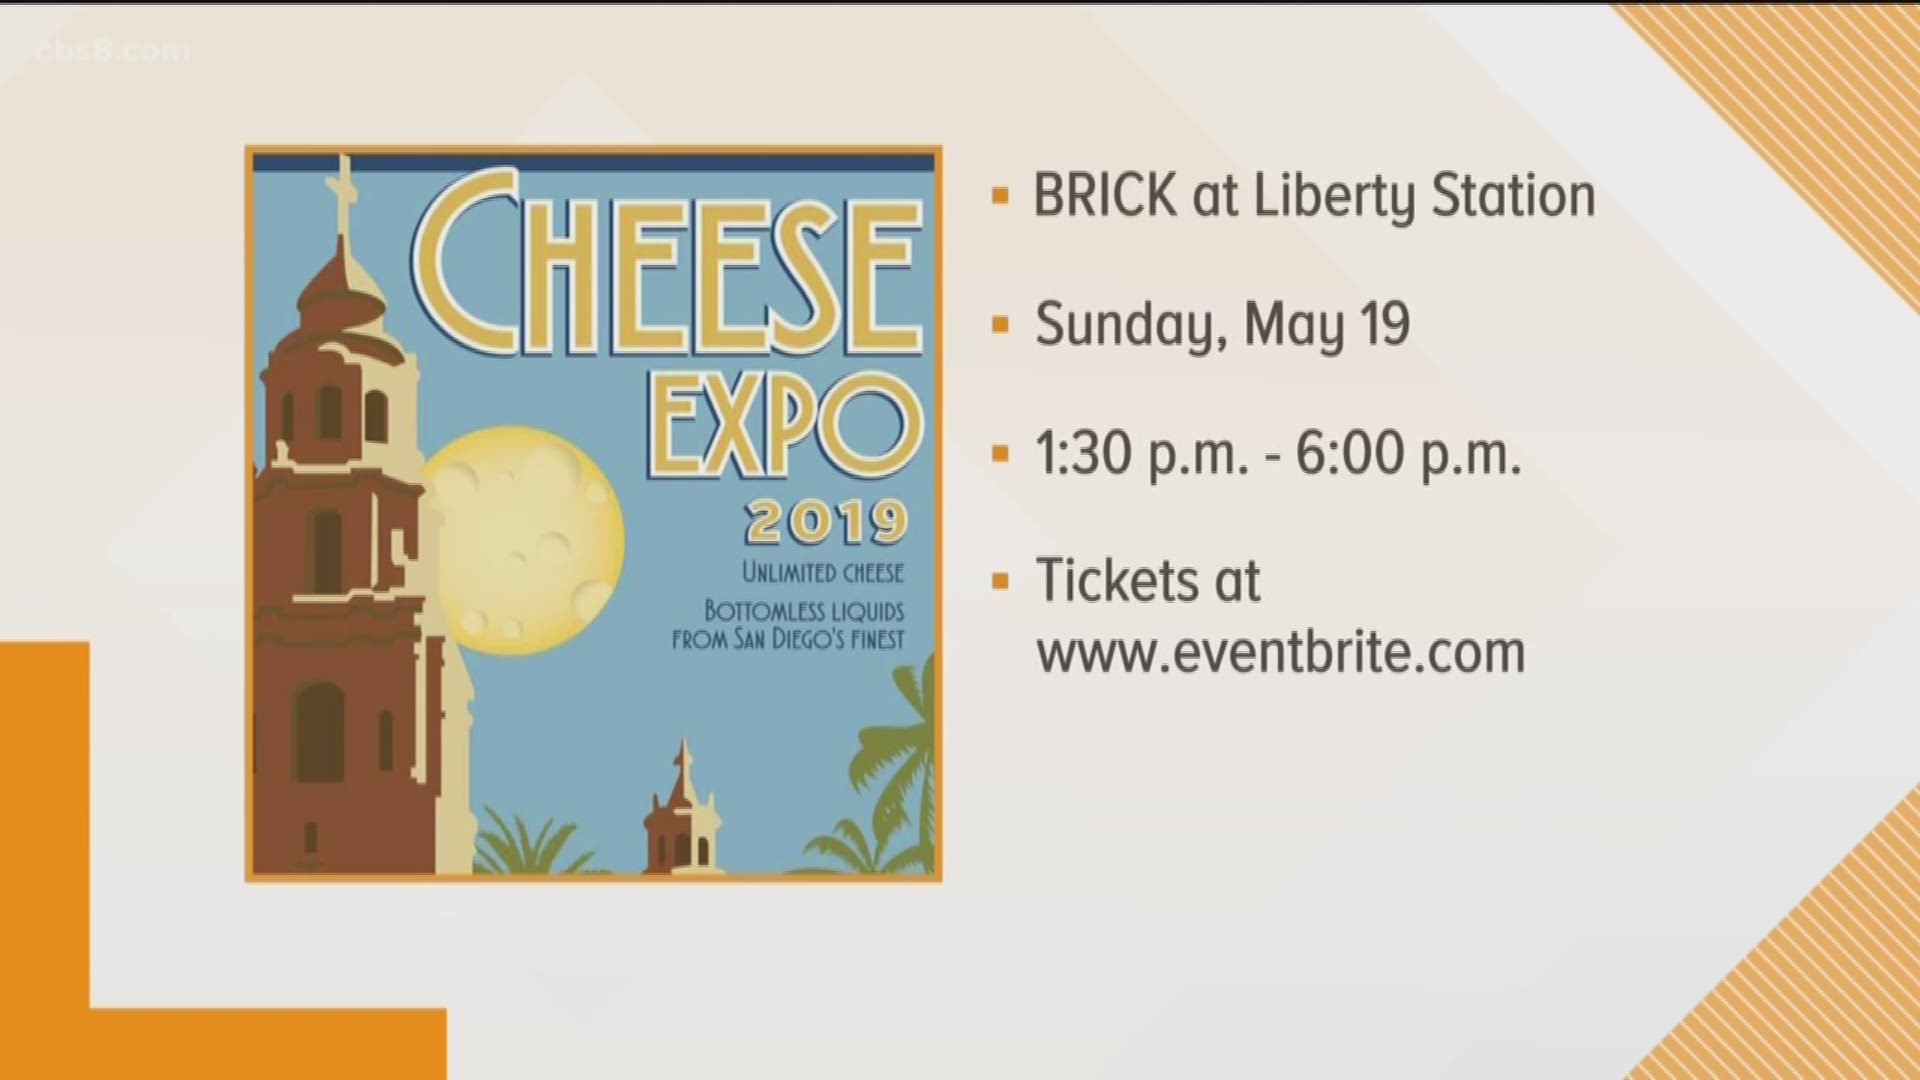 Bringing together a curated list of SAN DIEGO top breweries, coffee roasters, distillers, kombucha and cider makers, this one day EXPO features unique one-off collaborations, educational presentations, demonstrations, and explorations with CHEESEMAKERS from across AMERICA and some of our own, home-grown LIQUID talents.